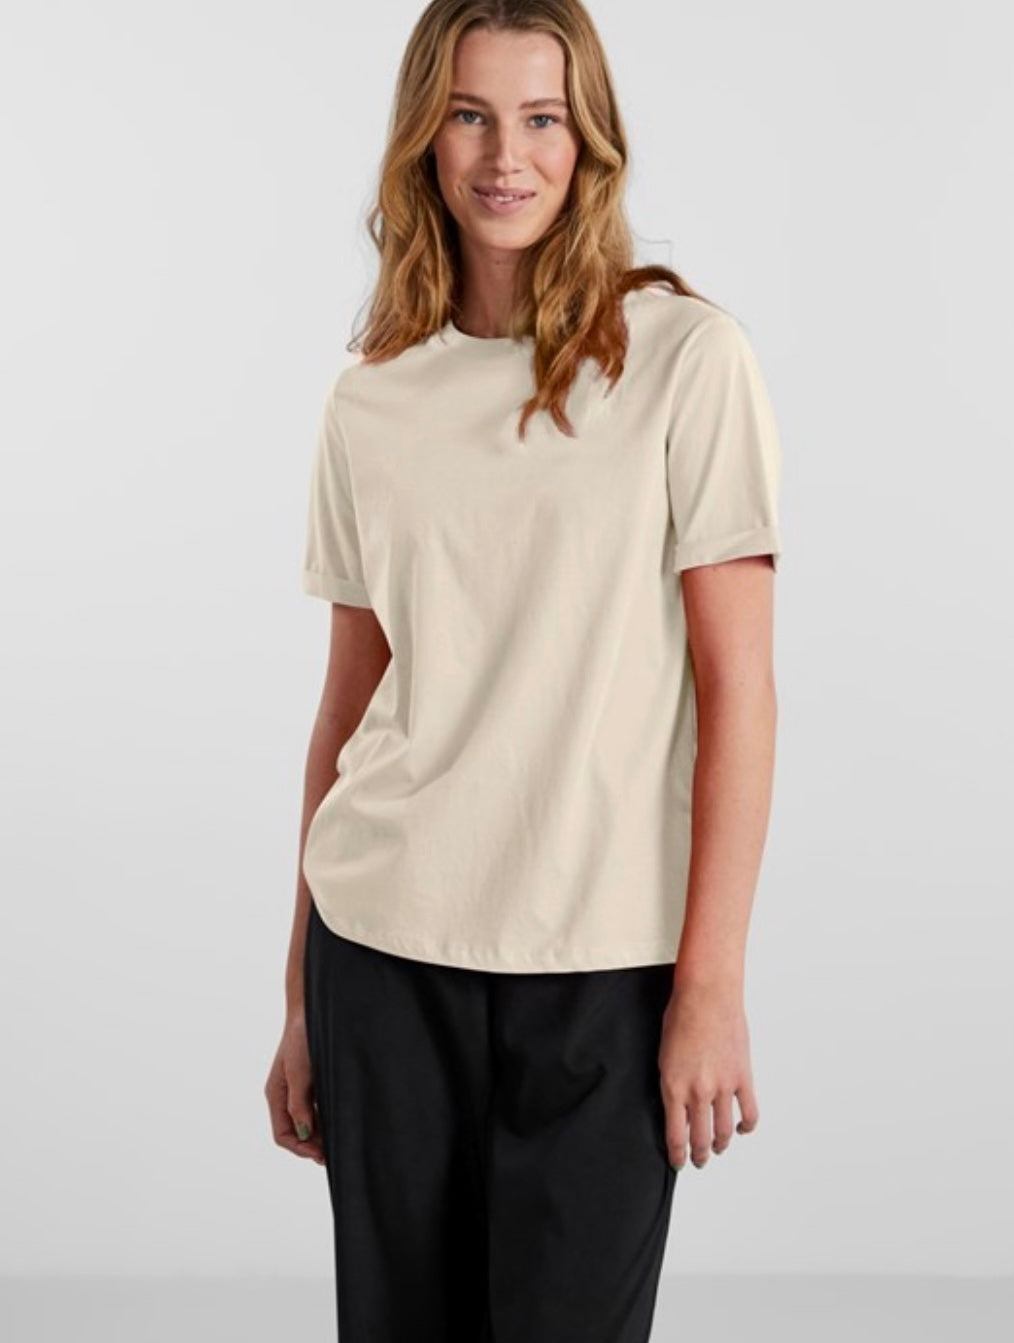 PIECES - RIA SS FOLD UP SOLID TEE - BIRCH